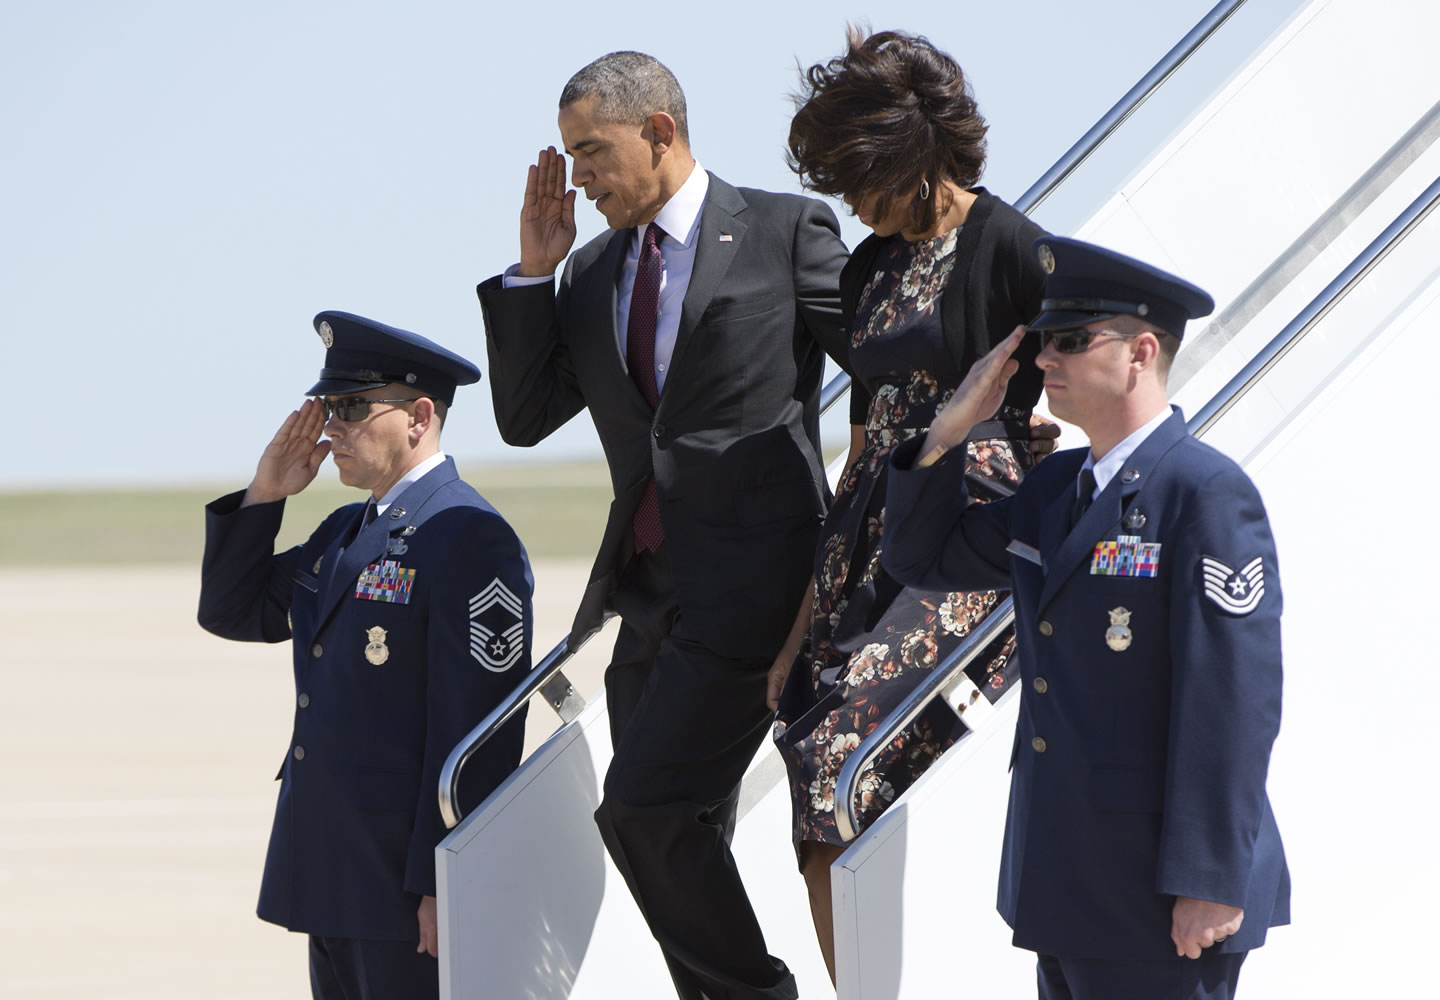 President Barack Obama salutes as he and and first lady Michelle Obama arrive on Air Force One at Robert Gray Army Air Field on Wednesday in Killeen, Texas, as they travel to Fort Hood for a memorial service for those killed there in a shooting last week.